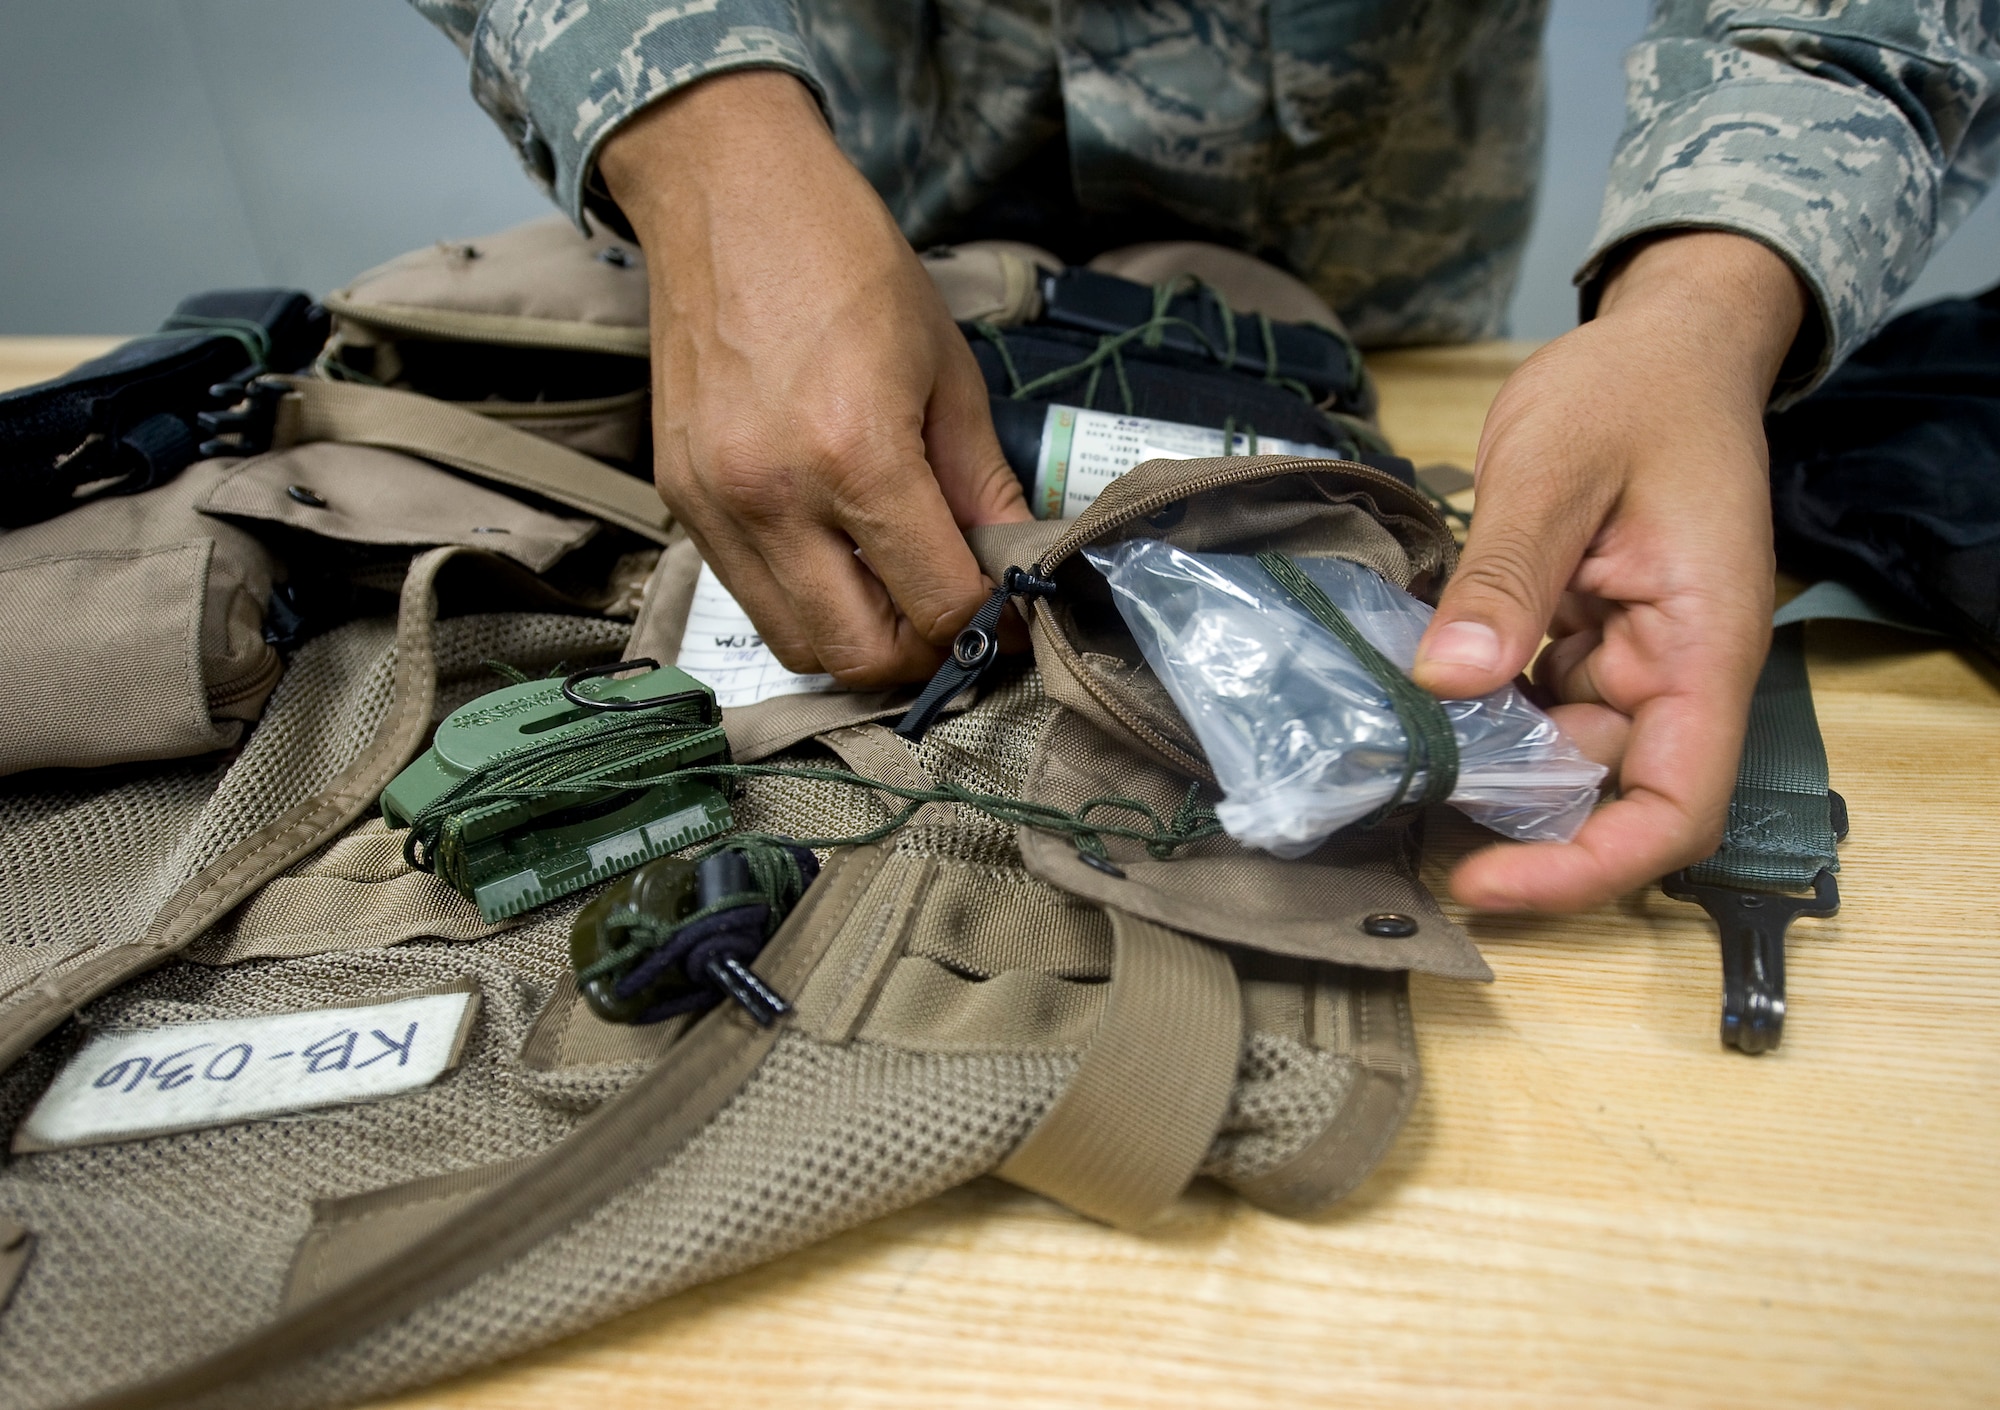 Airman Delonte Vance, 2nd Operations Support Squadron aircrew flight equipment journeyman, takes inventory of a survival vest during a yearly inspection at Barksdale Air Force Base, La., July 19. The survival vests are equipped with several tools to assist crew members in the event of a crash. Included in the vest are signaling devices, water, fire starting equipment and navigation aids. (U.S. Air Force photo/Staff Sgt. Chad Warren)(RELEASED)